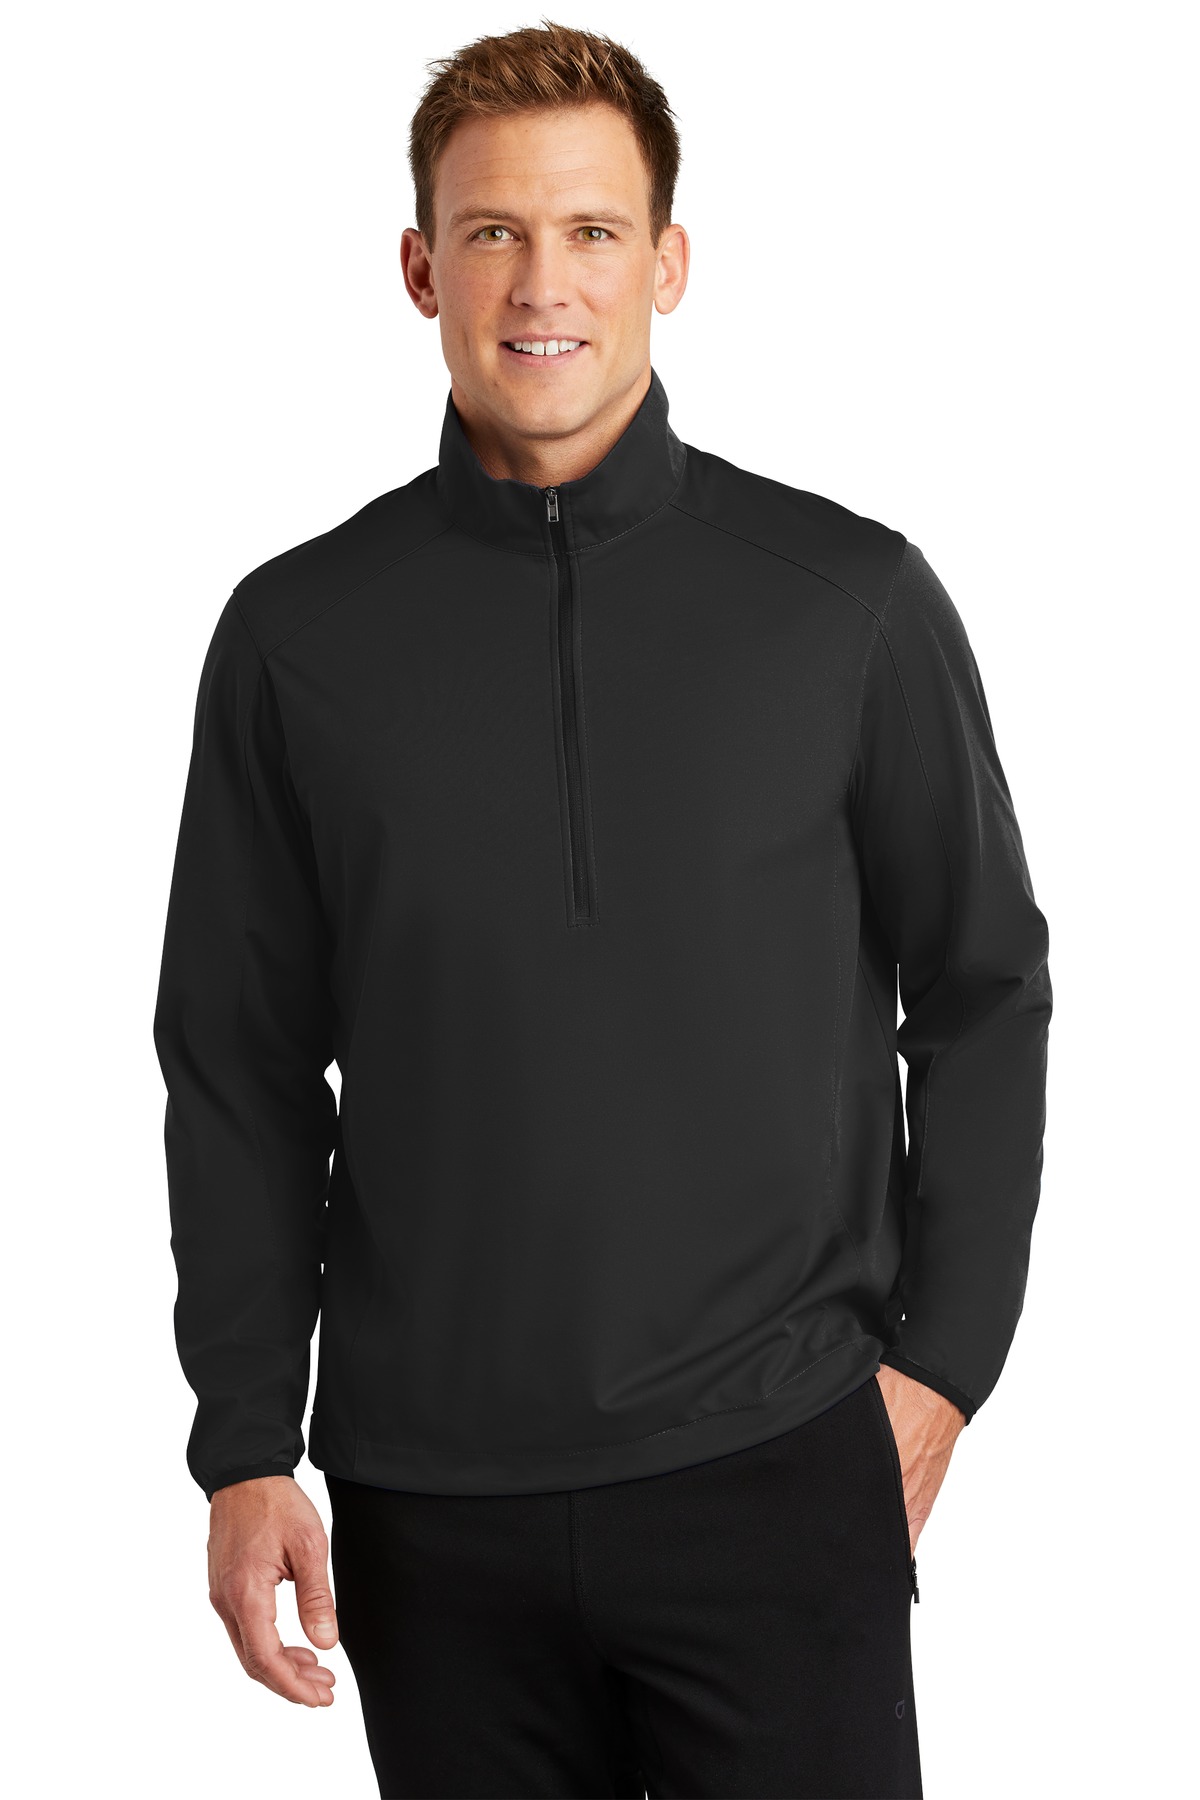 Port Authority Outerwear for Corporate & Hospitality ® Active 1/2-Zip Soft Shell Jacket.-Port Authority